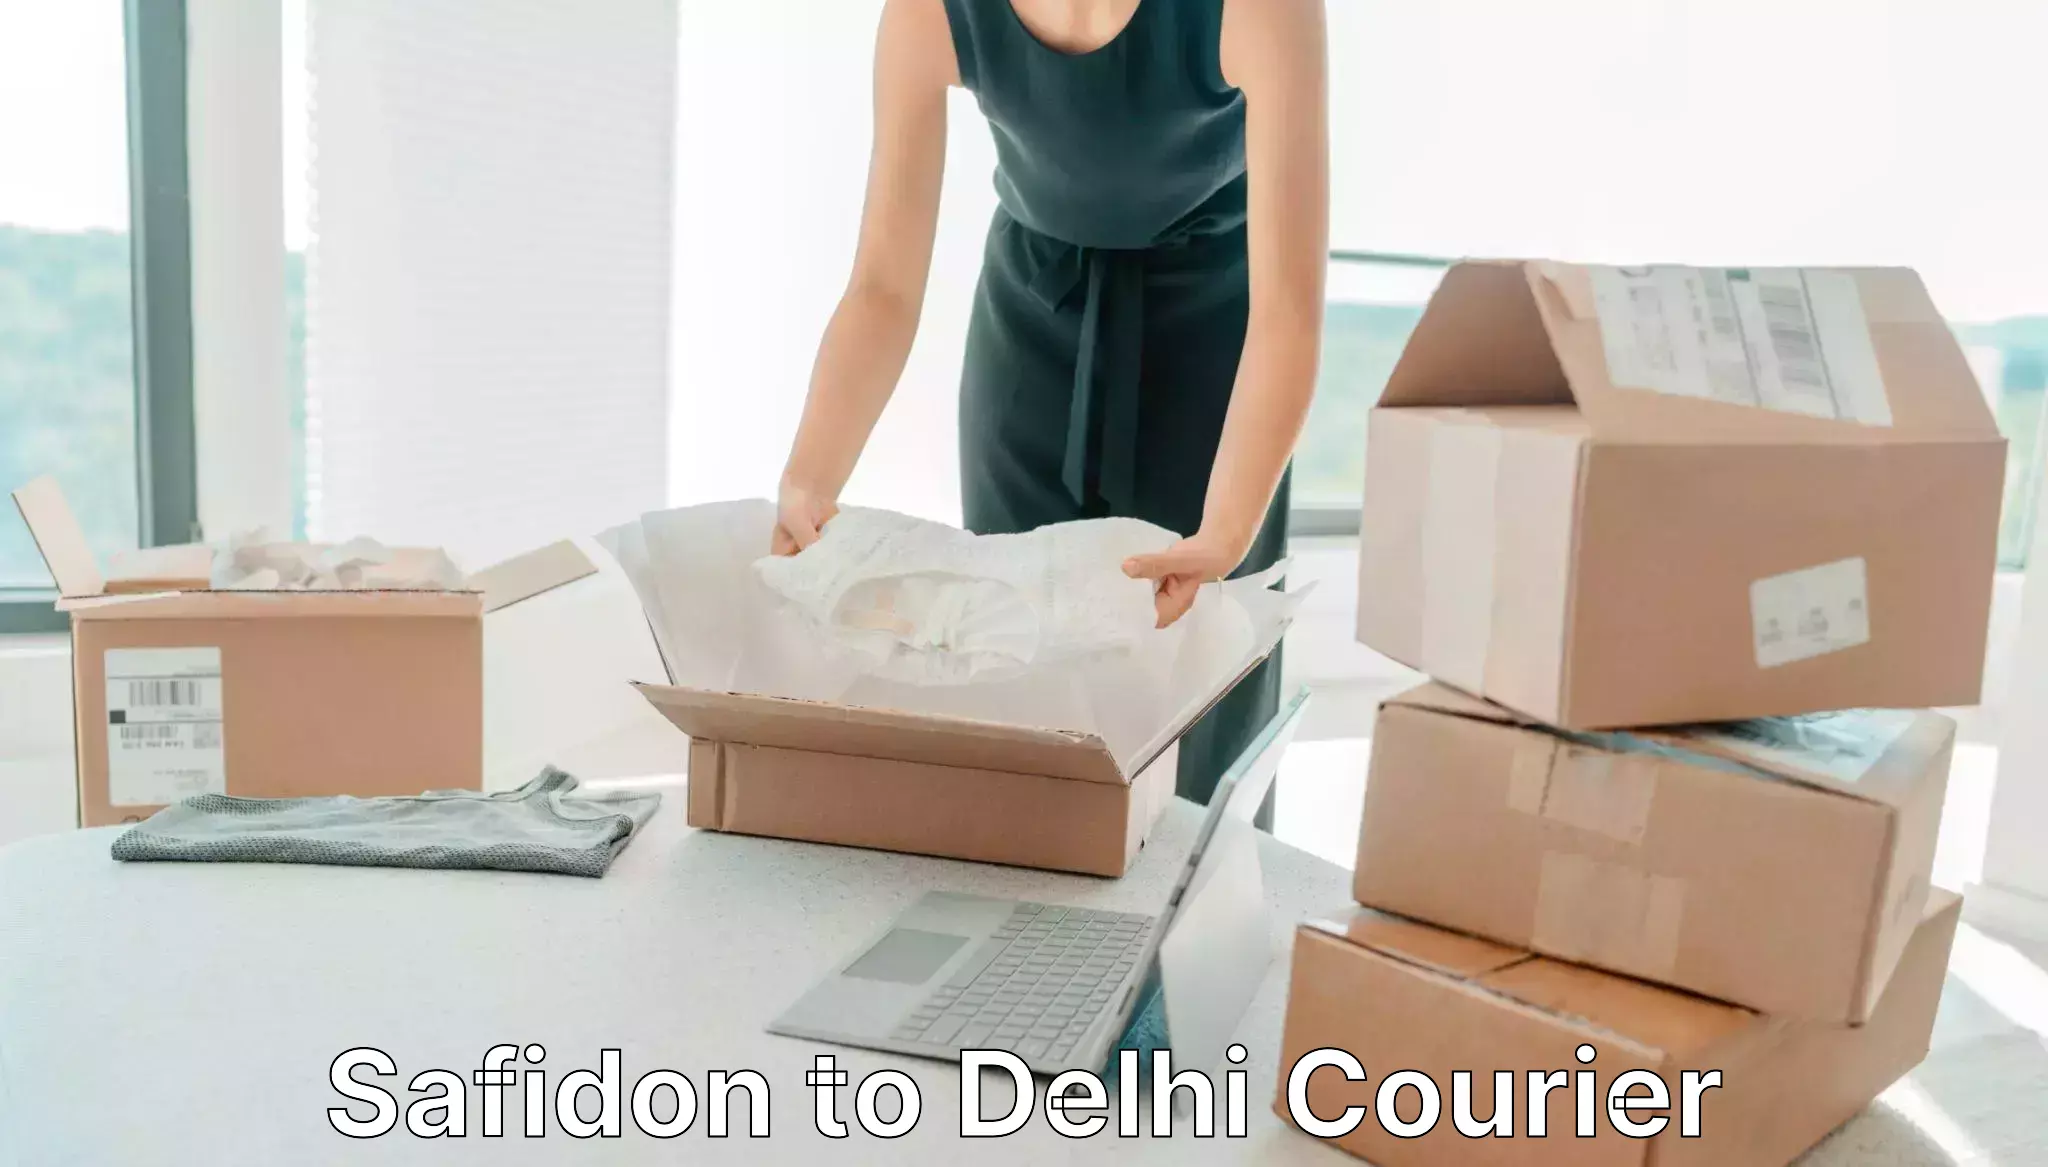 Courier service booking Safidon to Lodhi Road